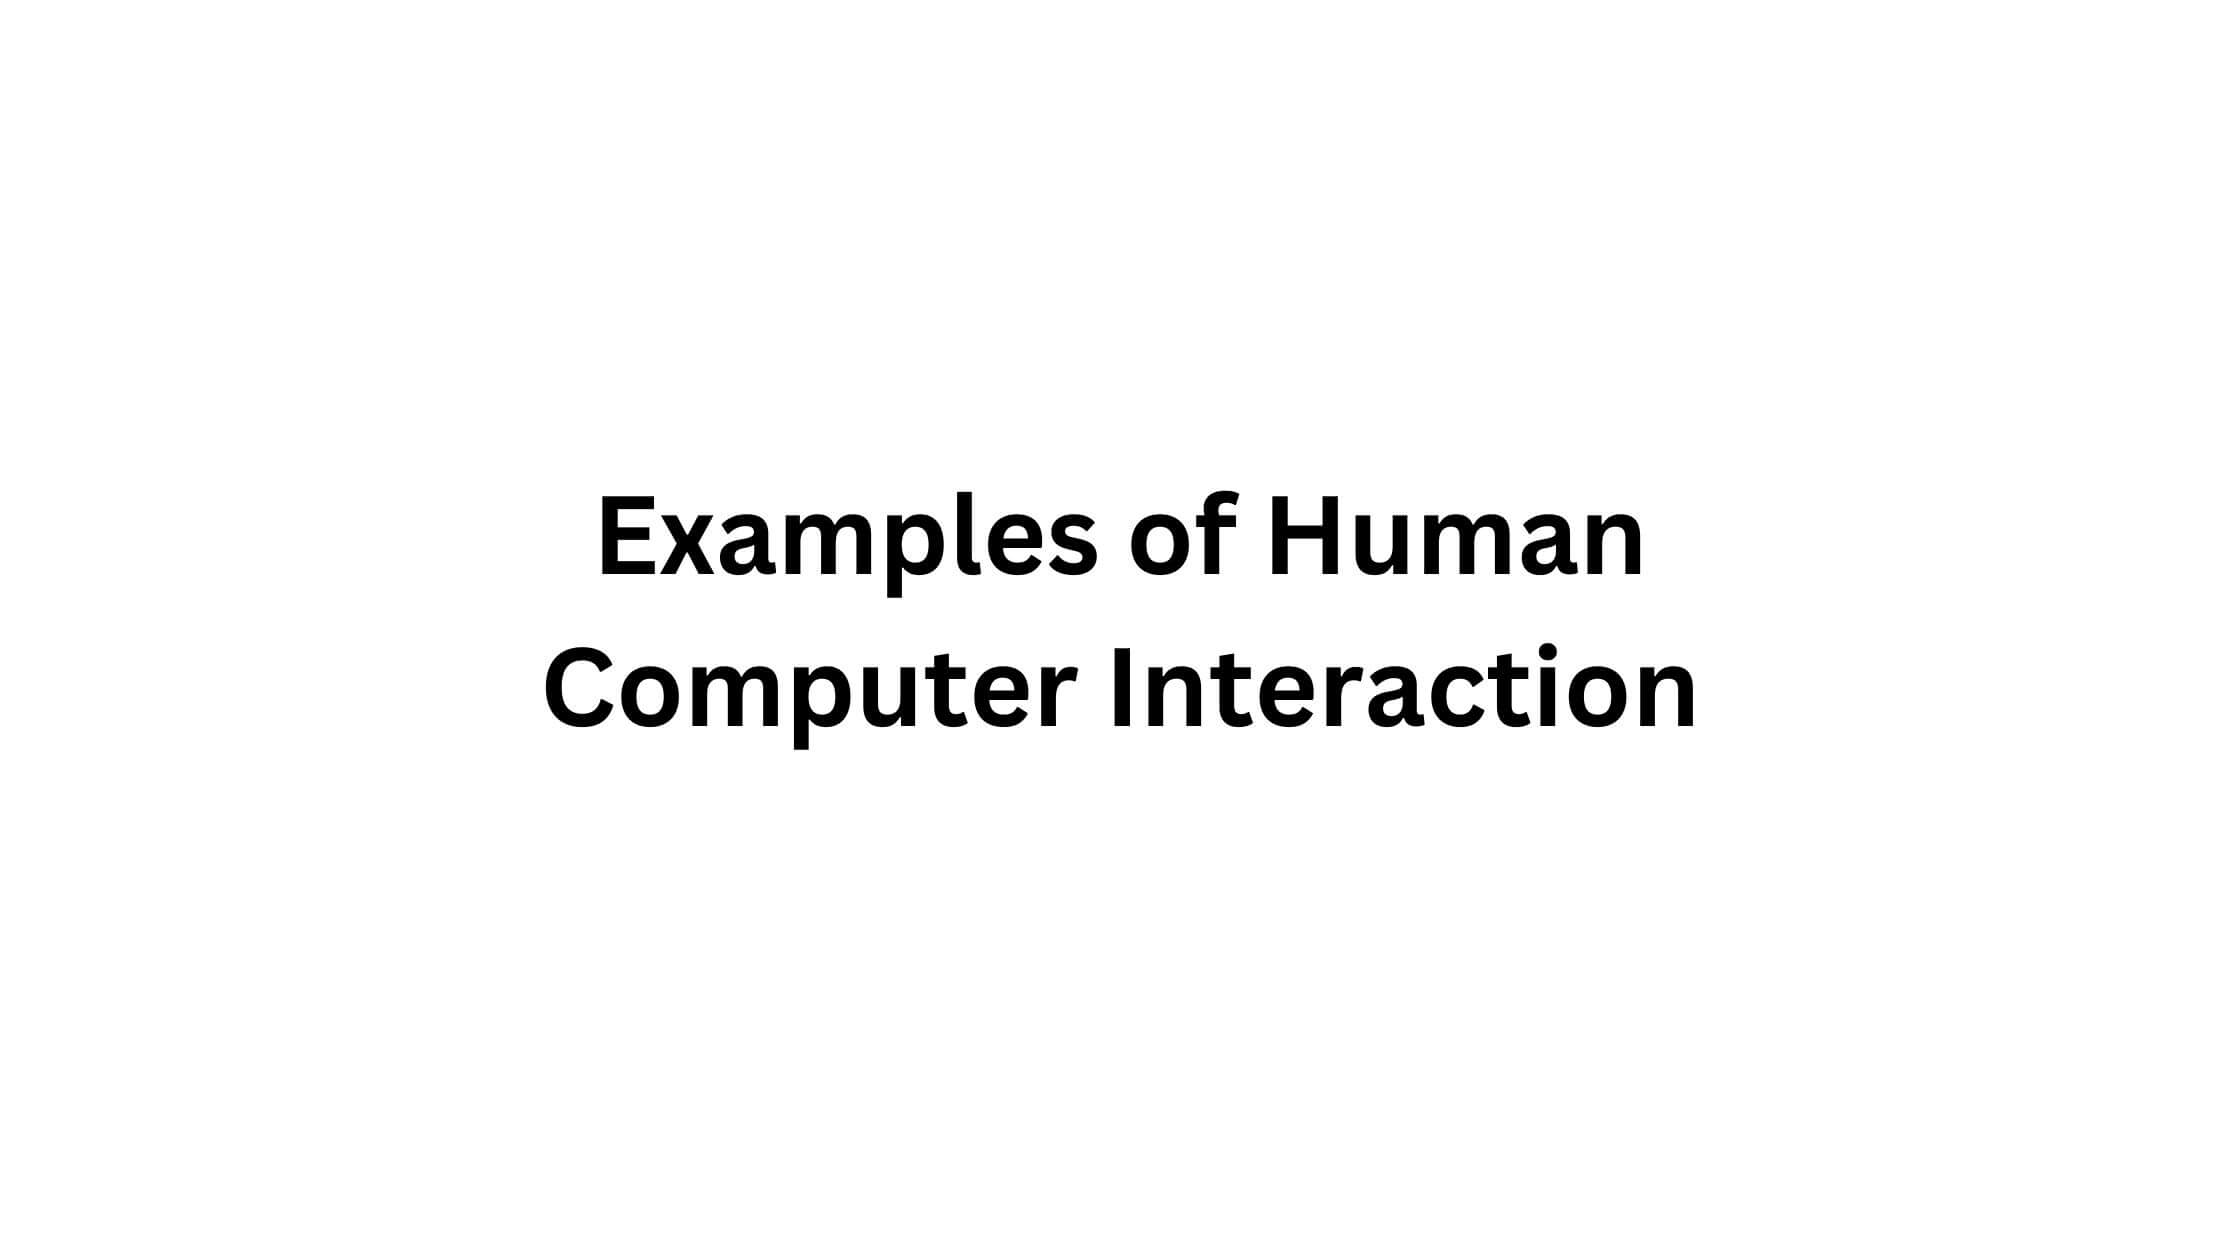 Examples of Human Computer Interaction